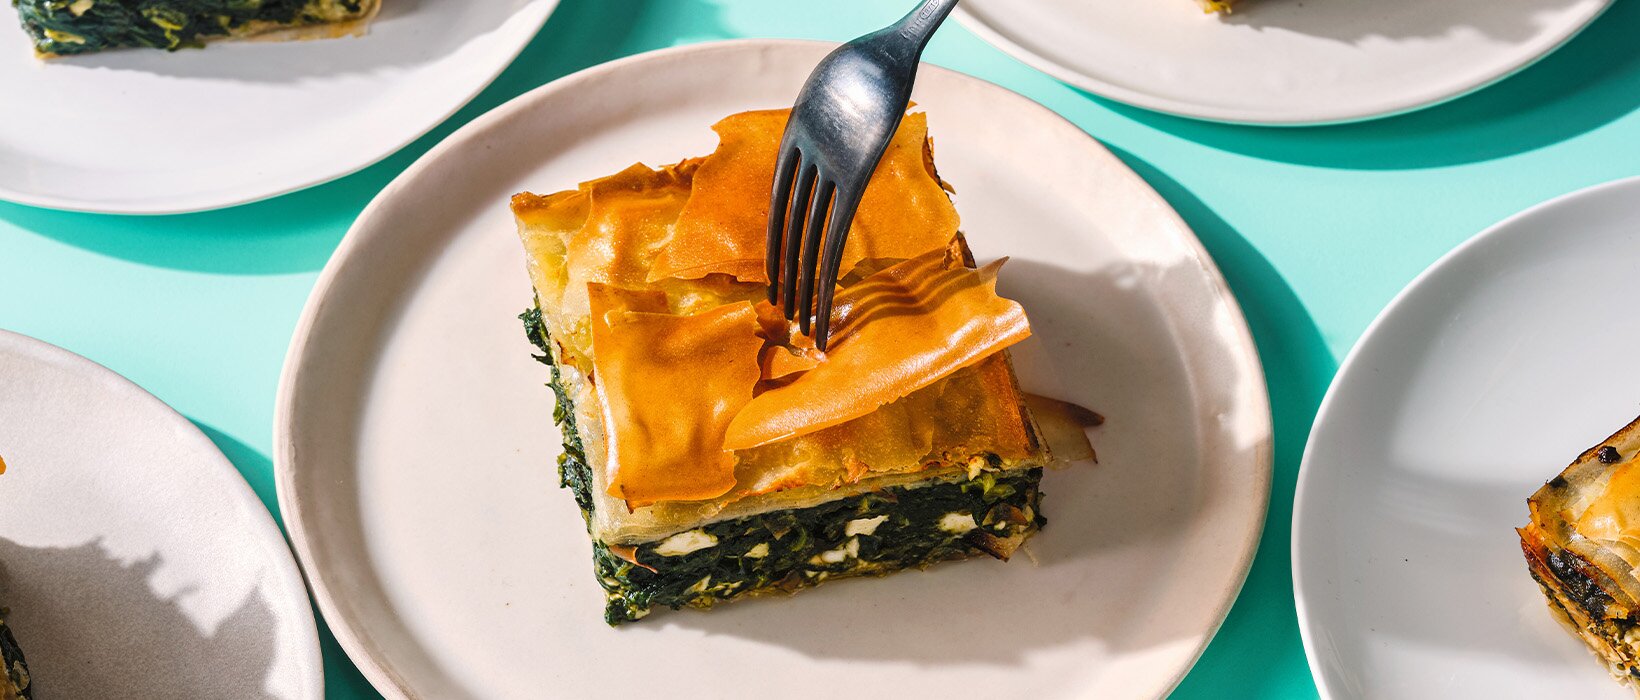 Recipe: Spinach and feta pie recipe from the Athenian